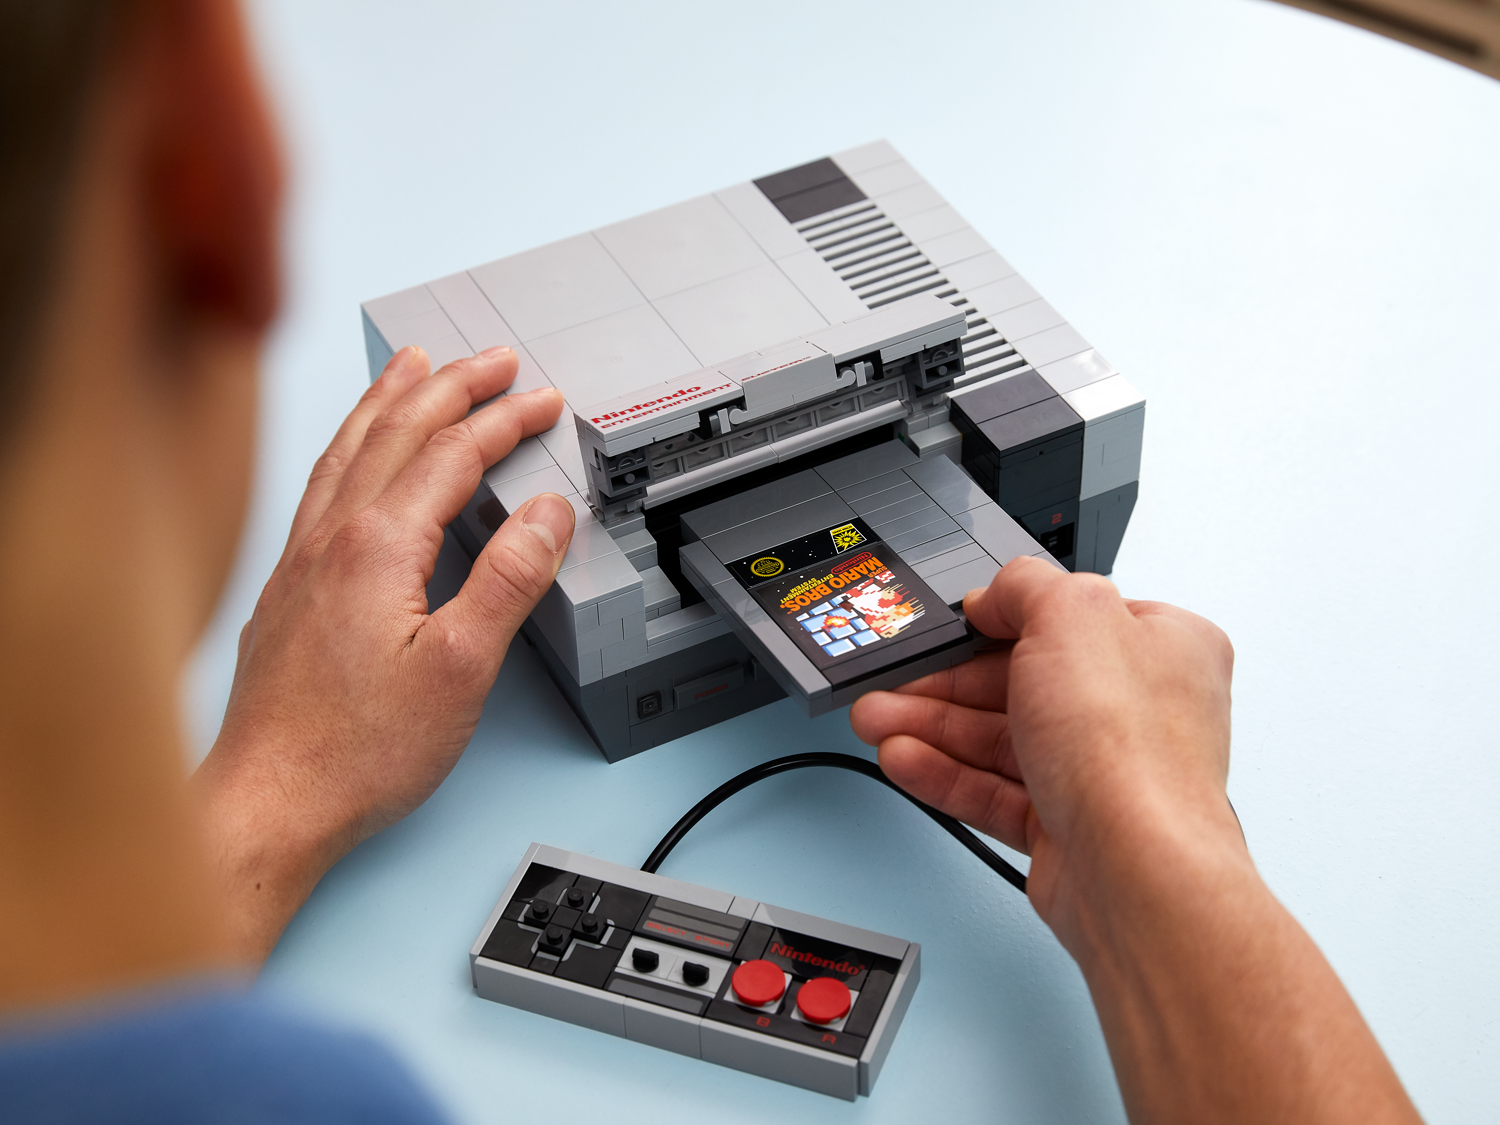 Lego NES Review: Bricked Consoles Can Be Wonderful, Actually